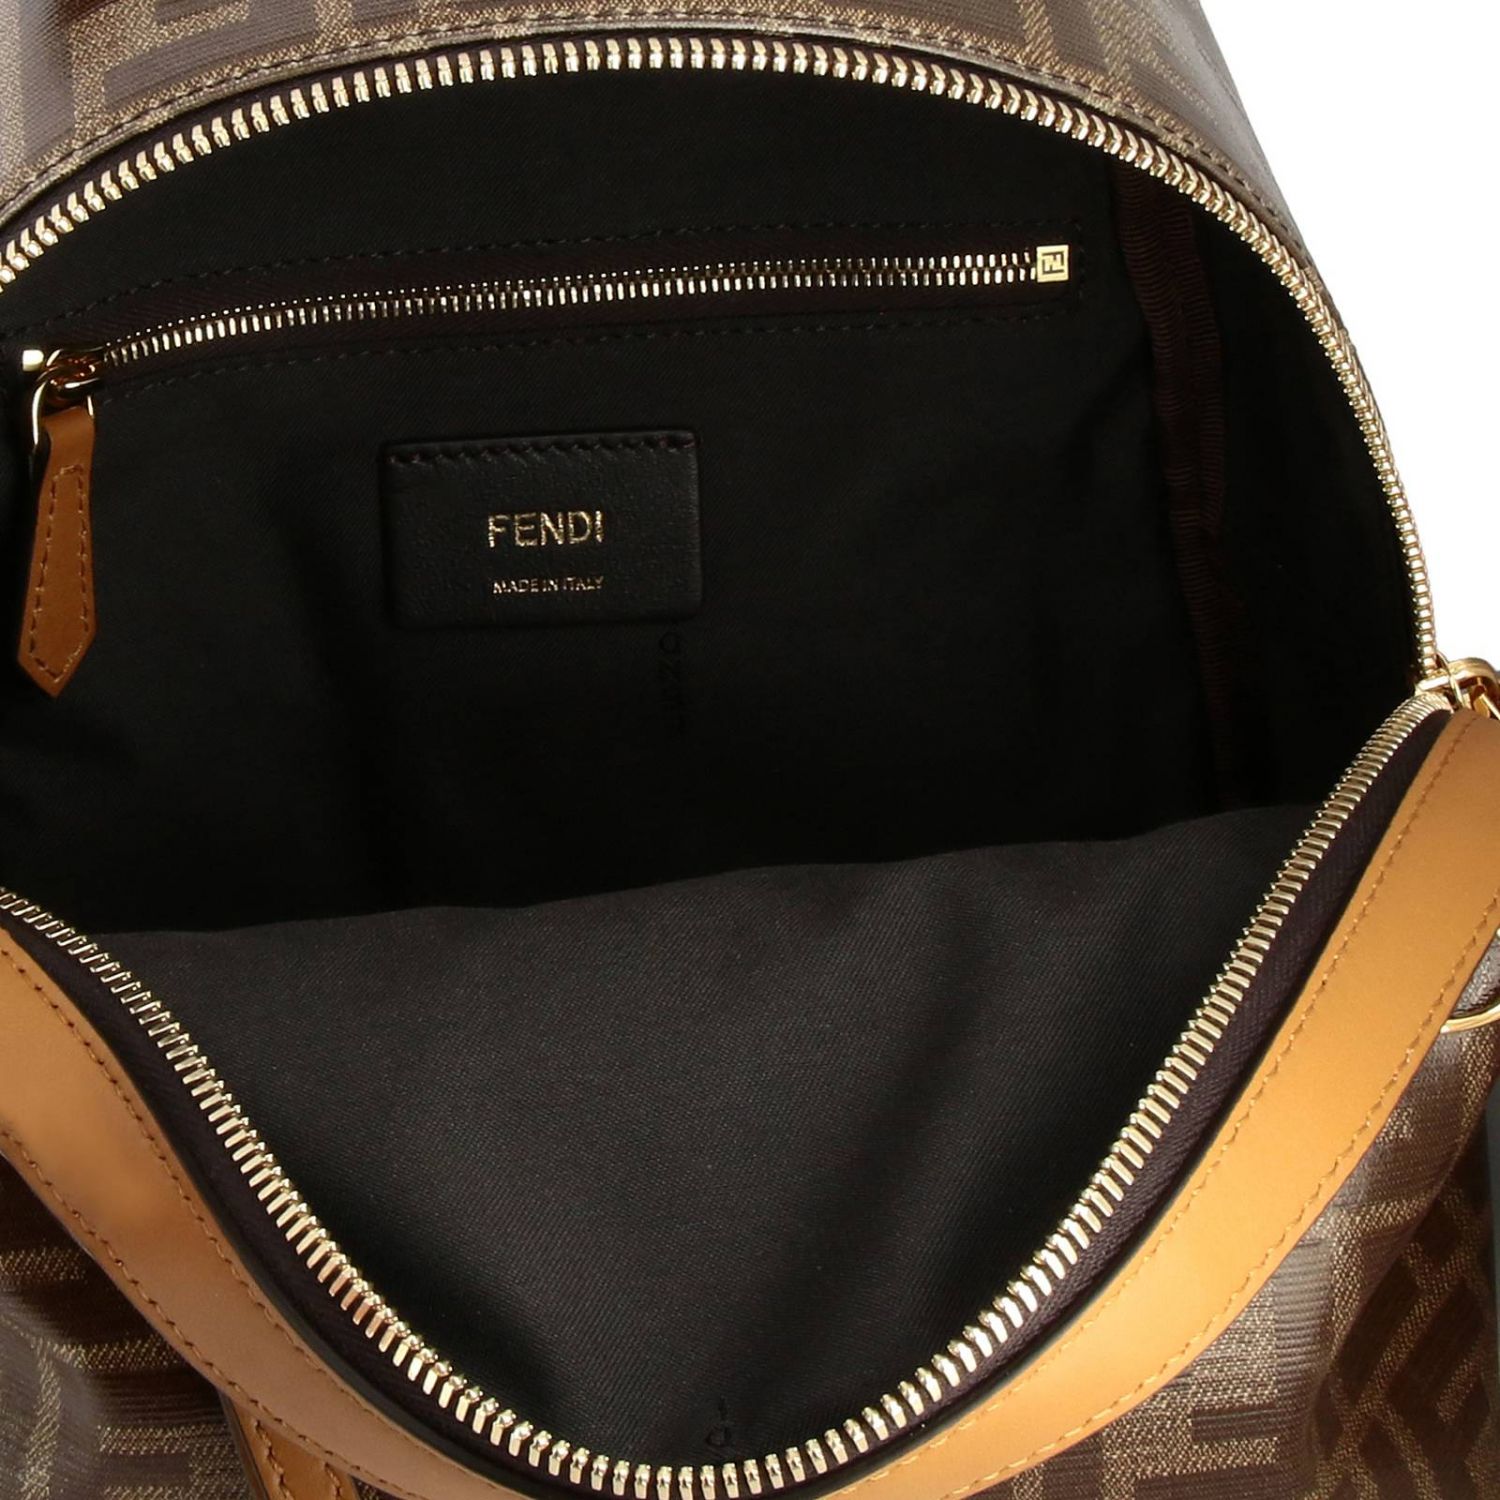 Fendi backpack in vitrified leather with FF all over print